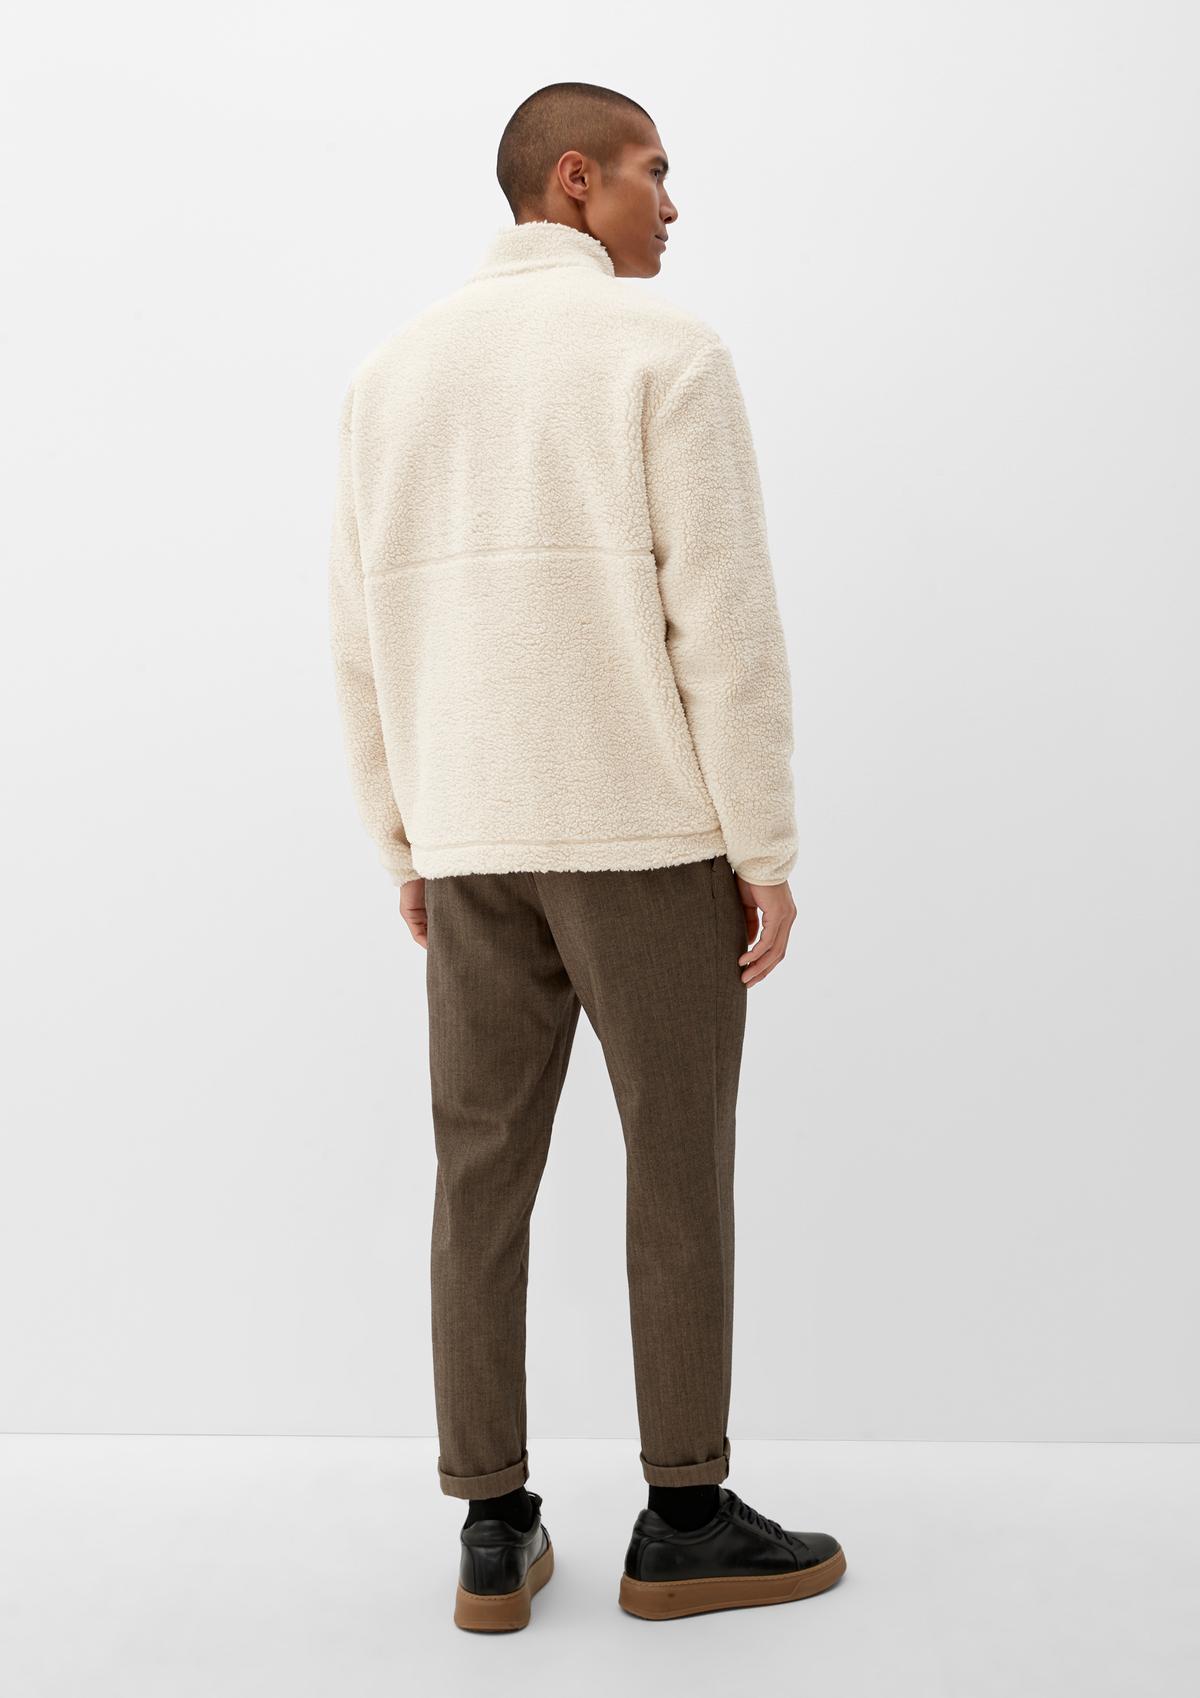 s.Oliver Zip neck jumper made of teddy plush